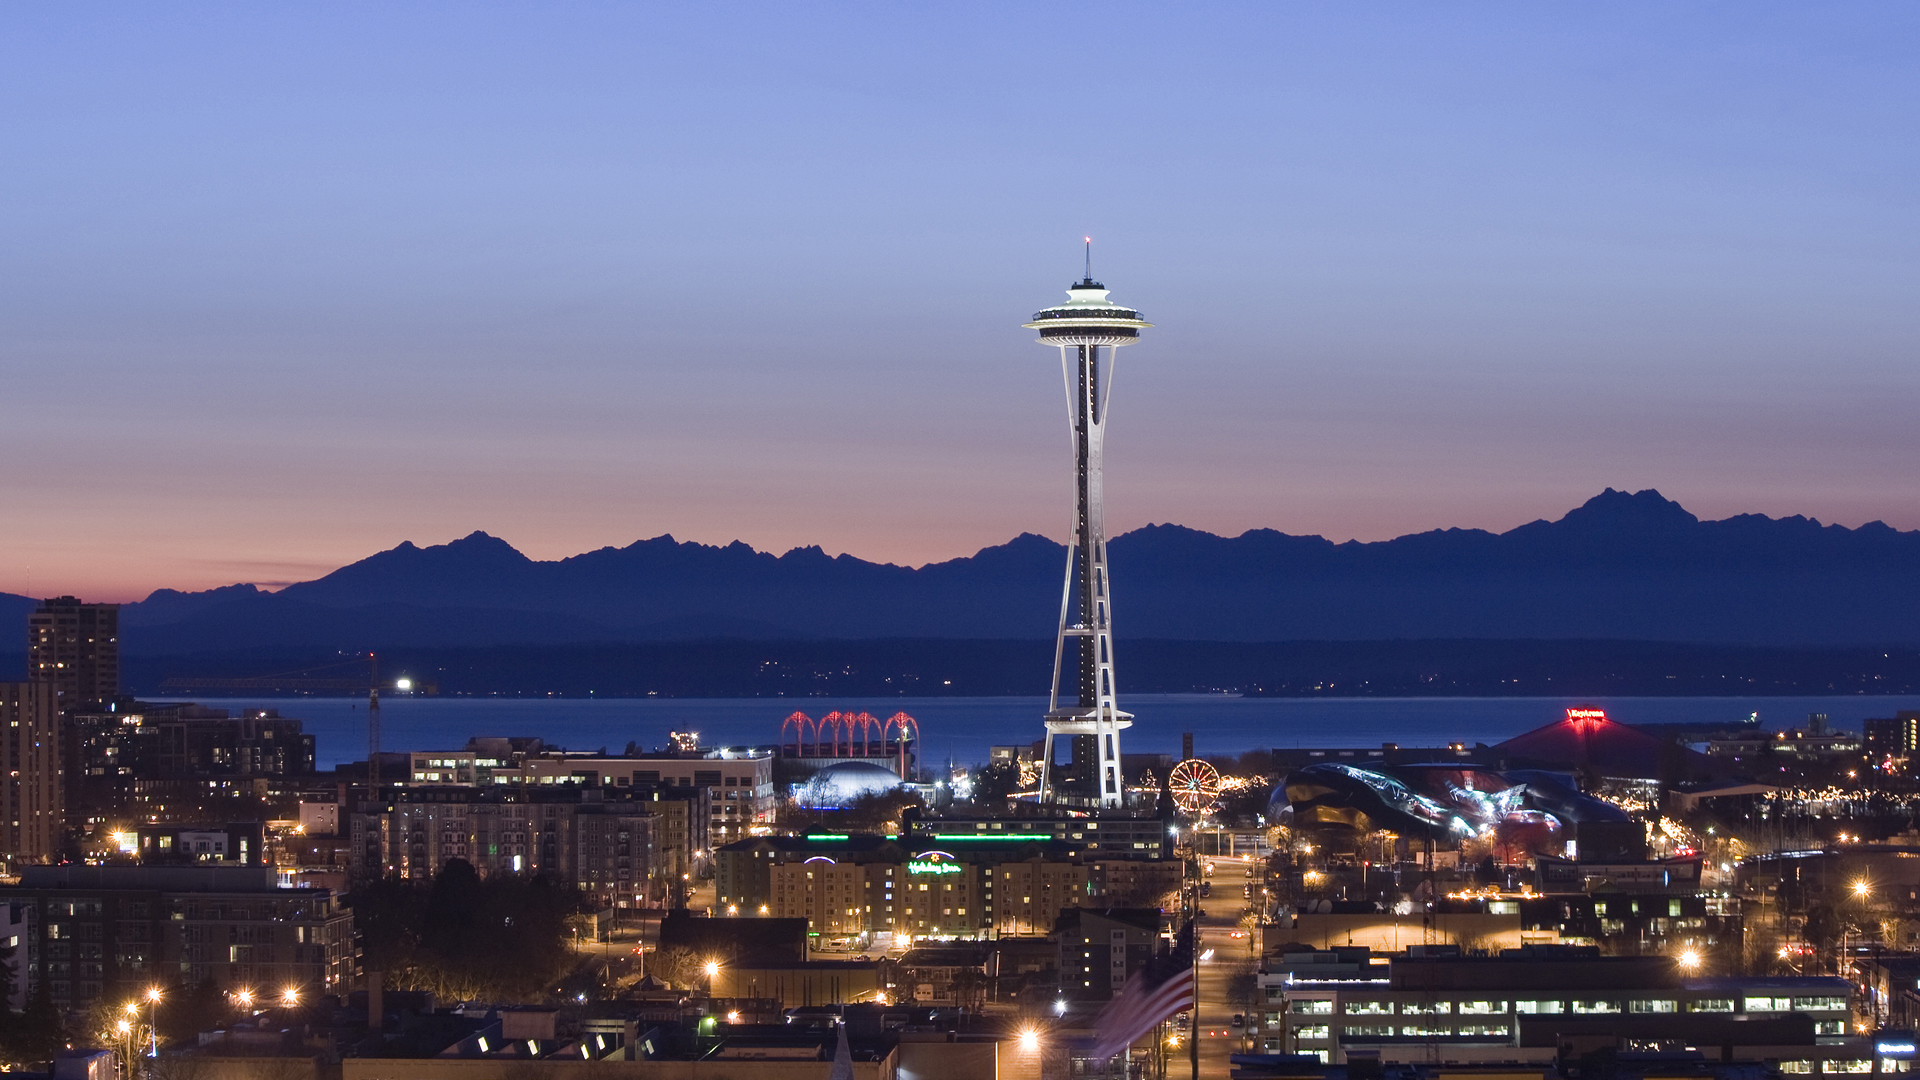 seattle, man made, building, city, light, mountain, sky, space needle, usa, cities